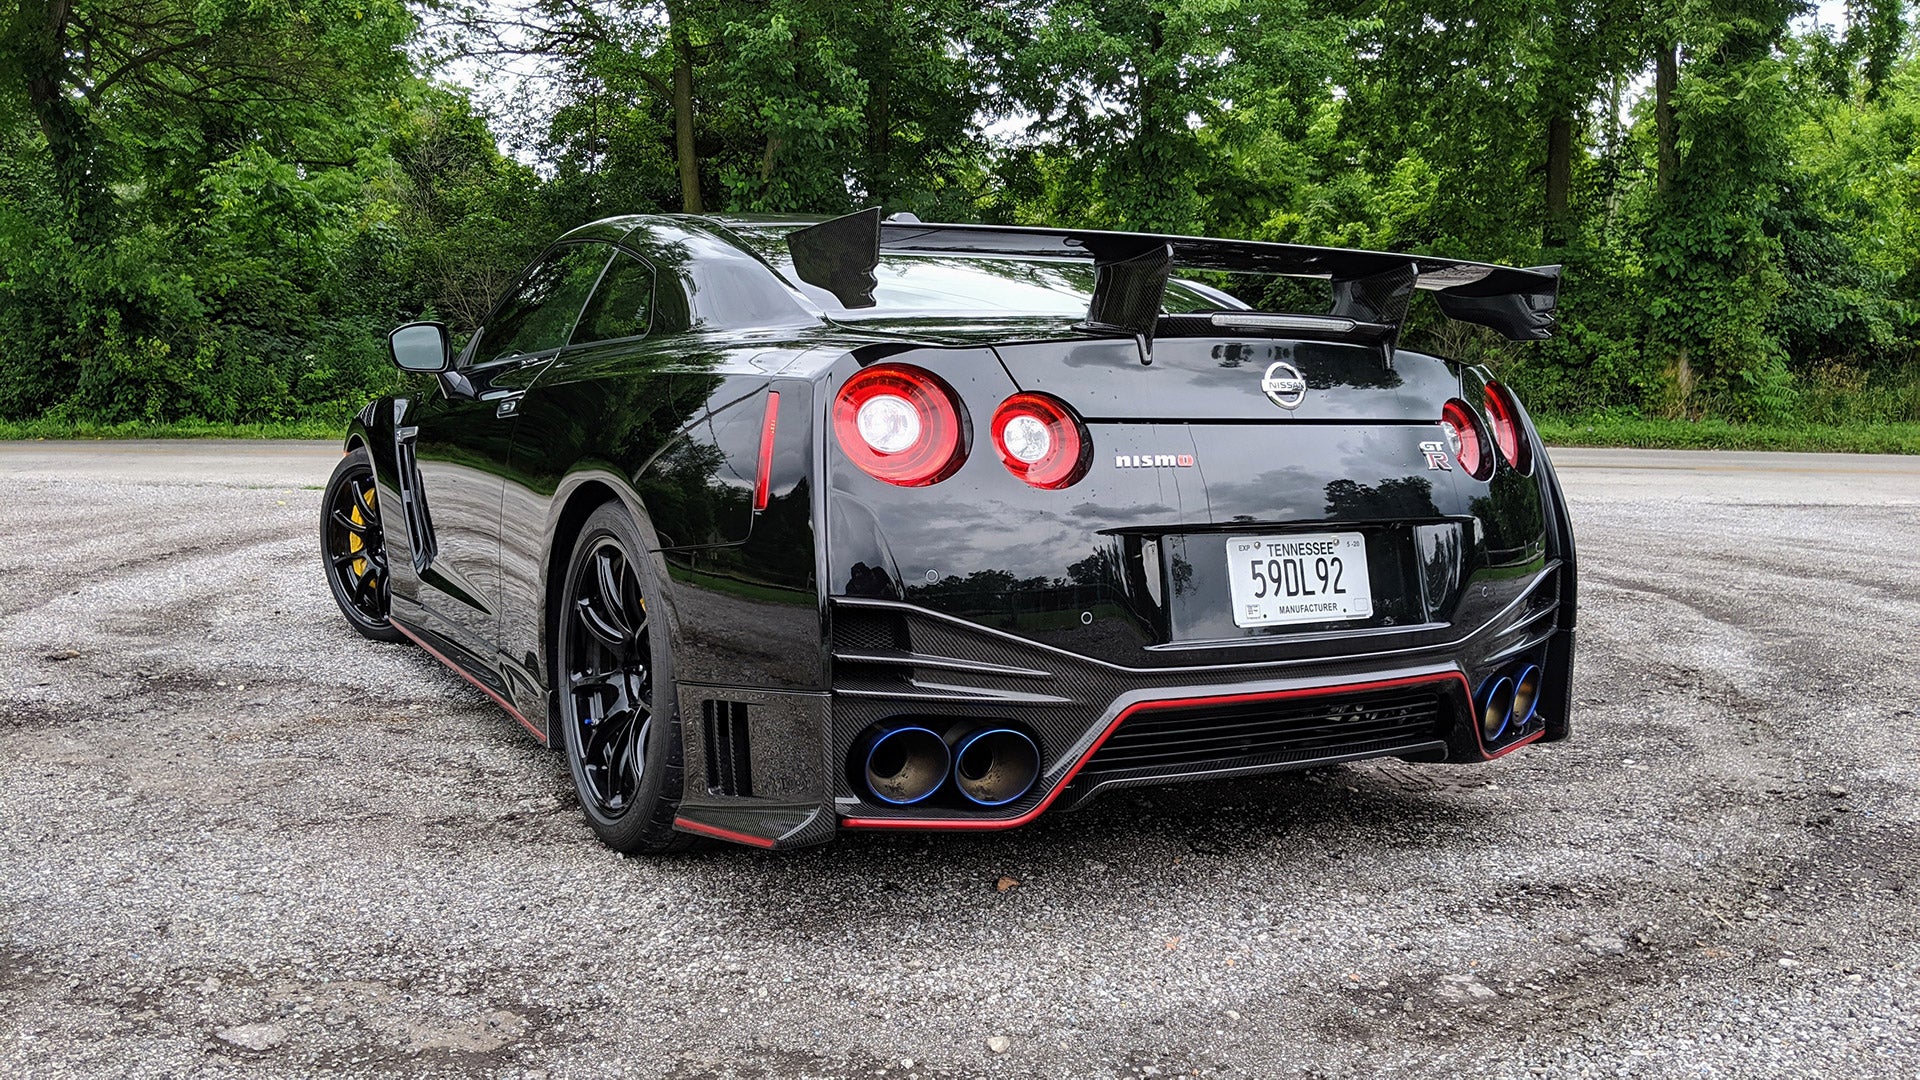 Here’s Why Nissan Thinks It Can Charge $212,000 for the 2020 Nissan GT-R Nismo